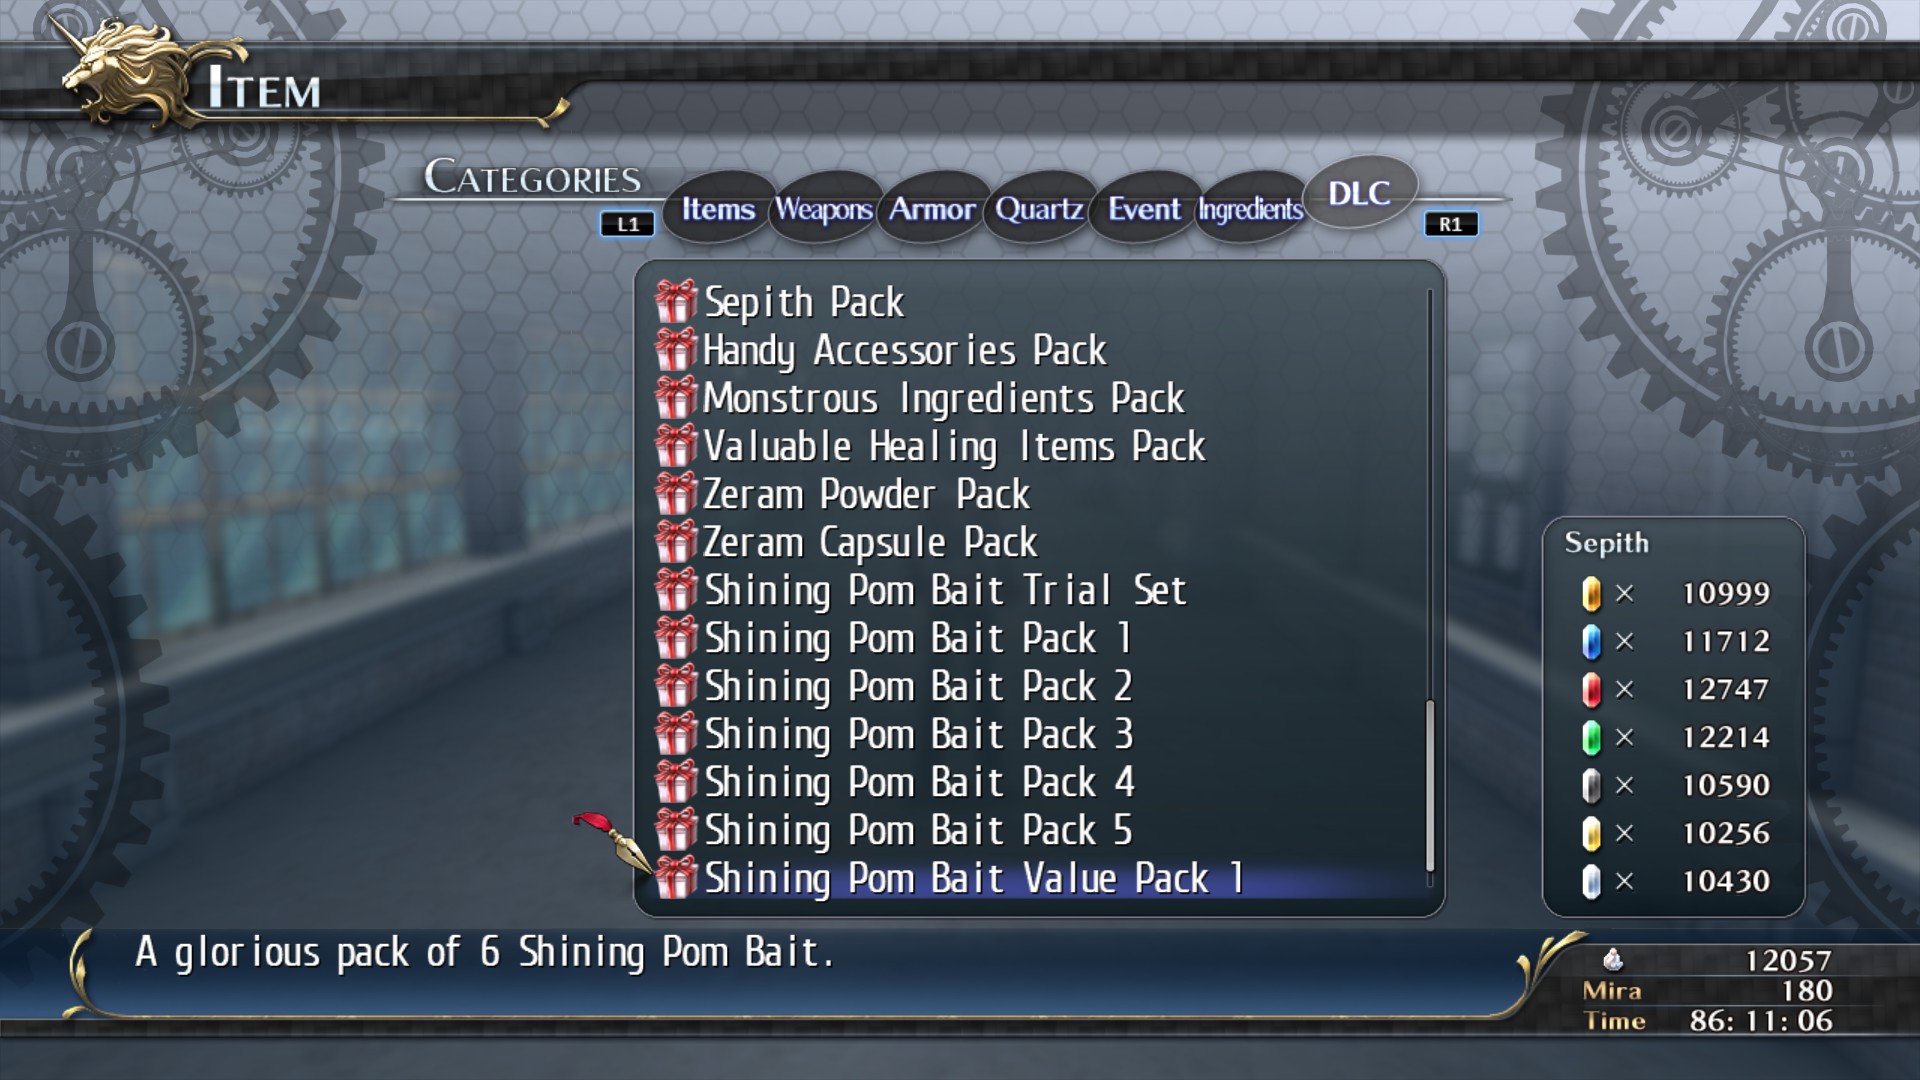 The Legend of Heroes: Trails of Cold Steel - Shining Pom Bait Value Pack 1 Featured Screenshot #1